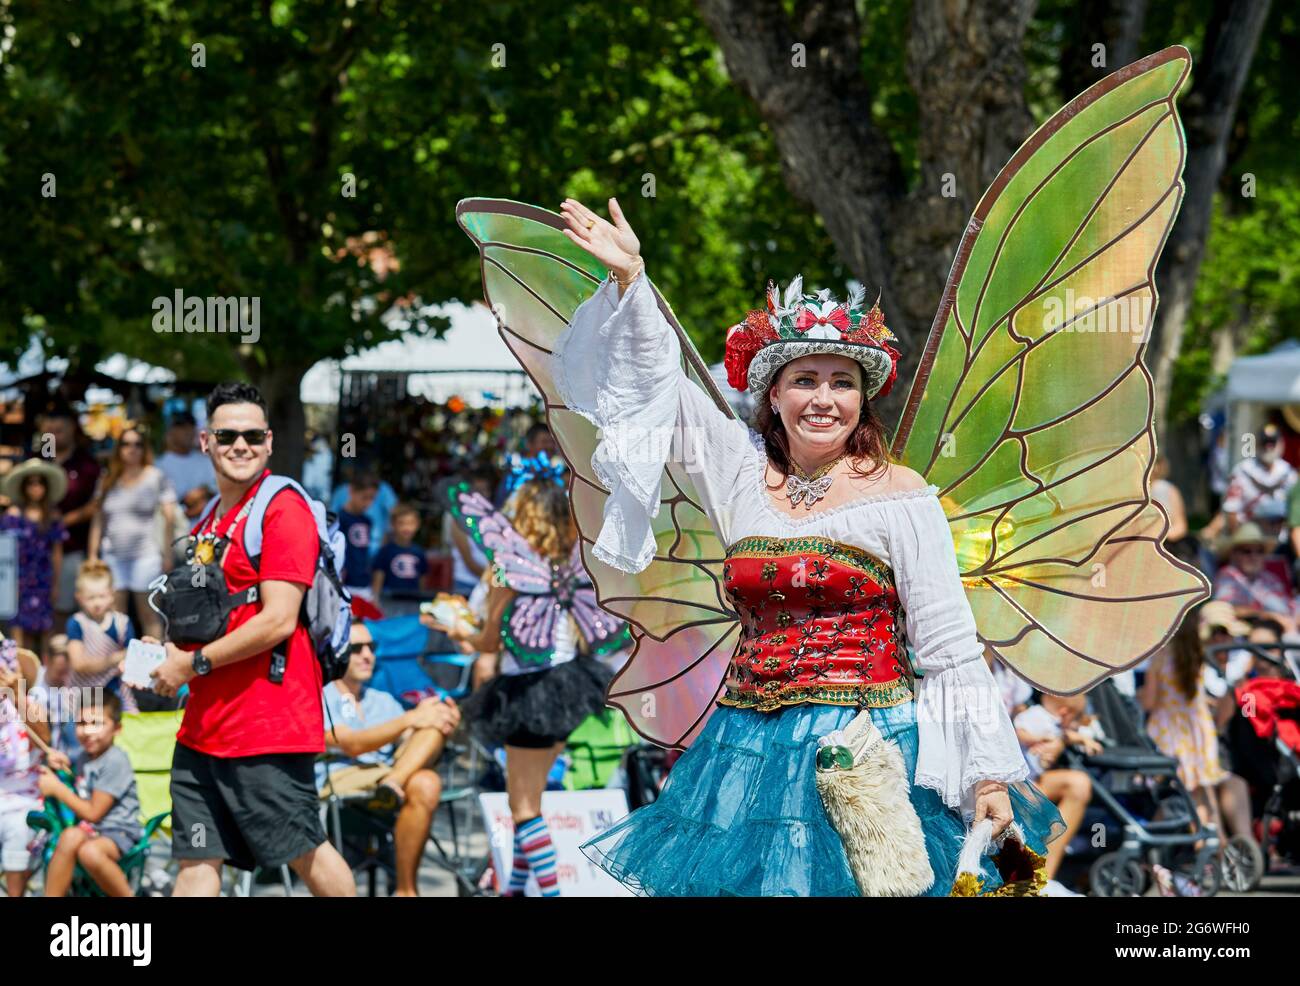 Prescott, Arizona, USA - July 3, 2021: Woman dressing in a fairy costume with wings in the 4th of July parade Stock Photo